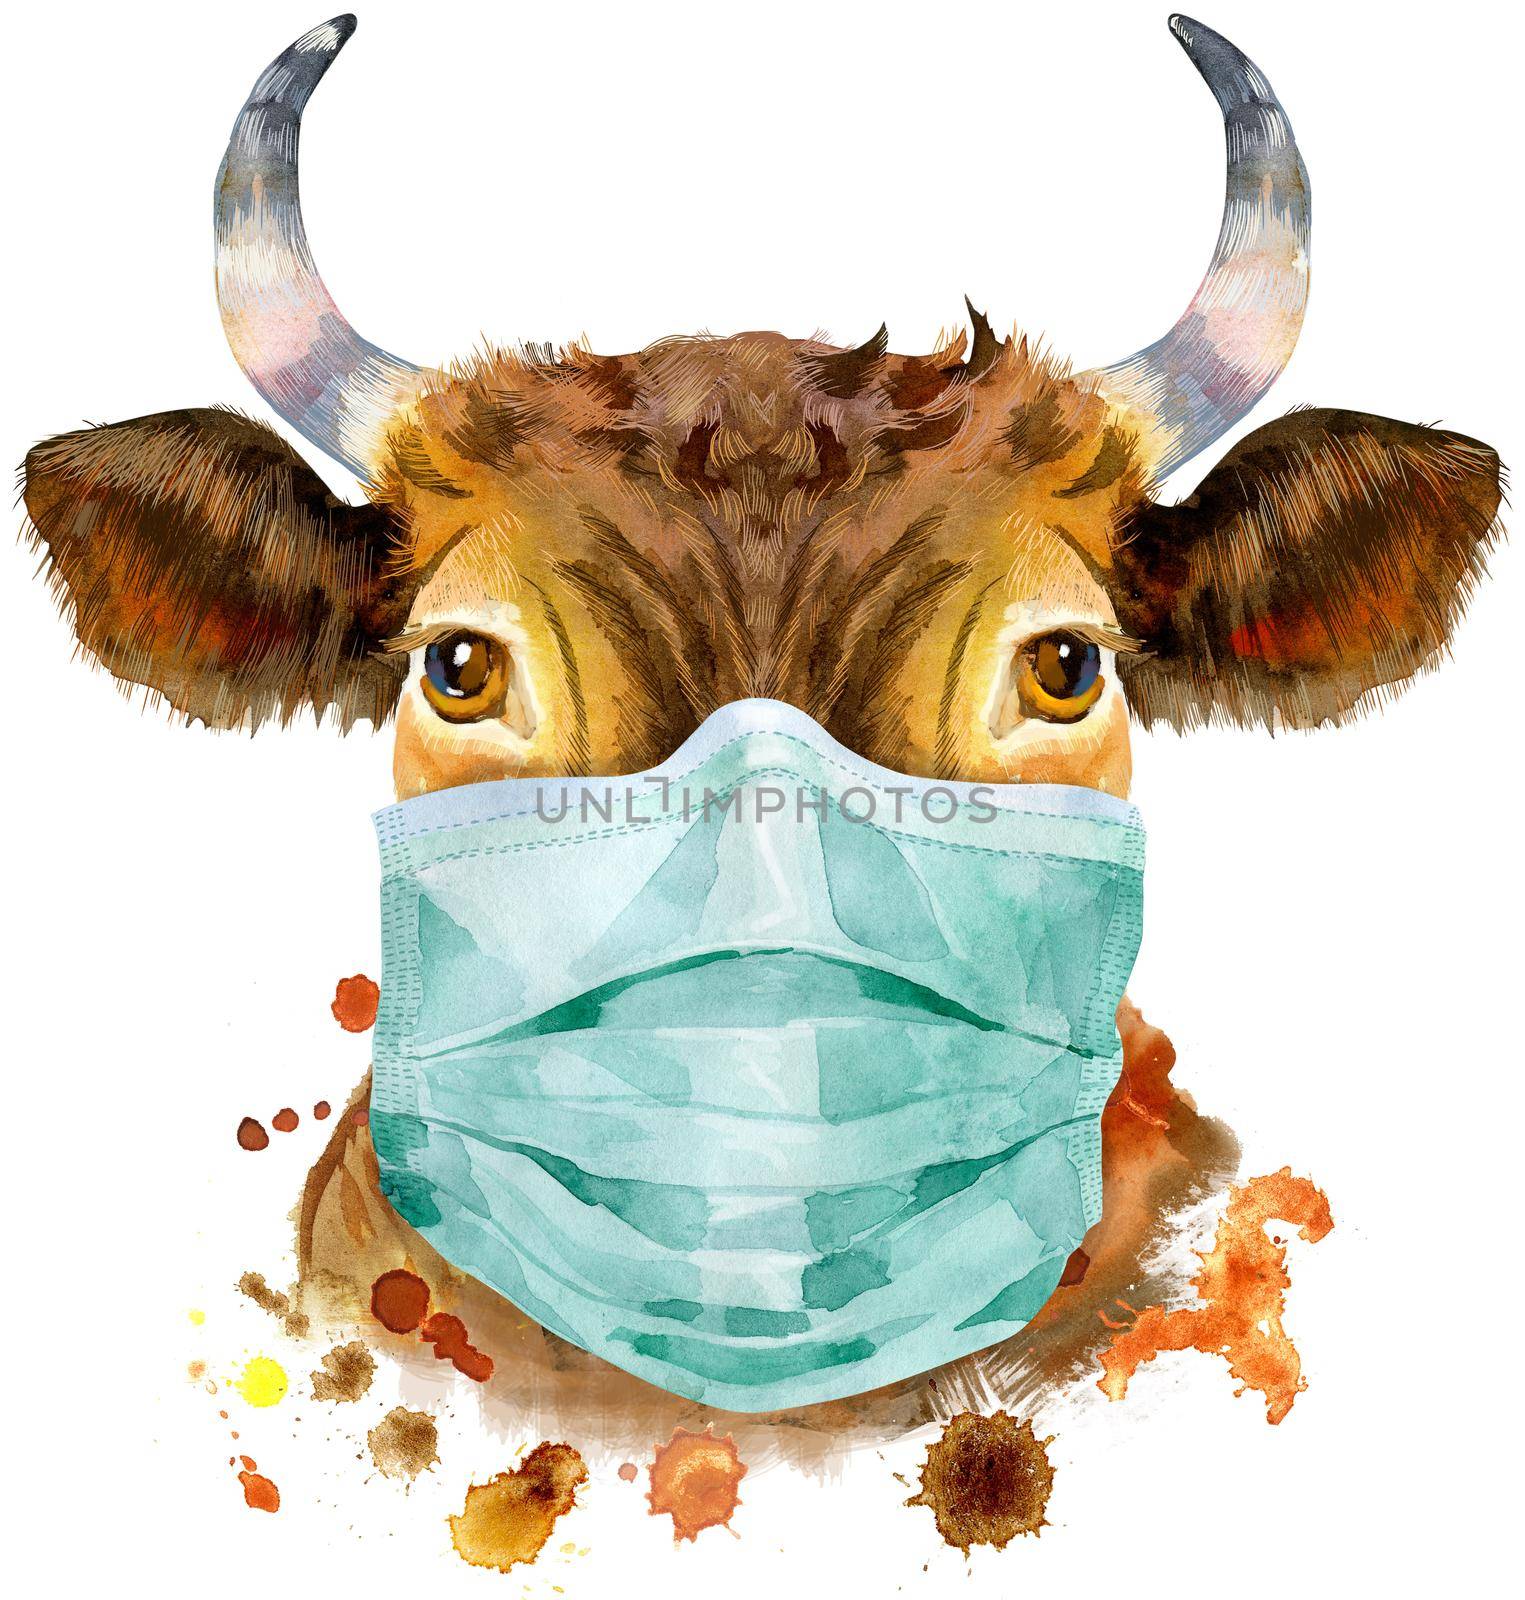 Bull in medical protective mask. Watercolor graphics. Bull animal illustration with splash watercolor textured background.